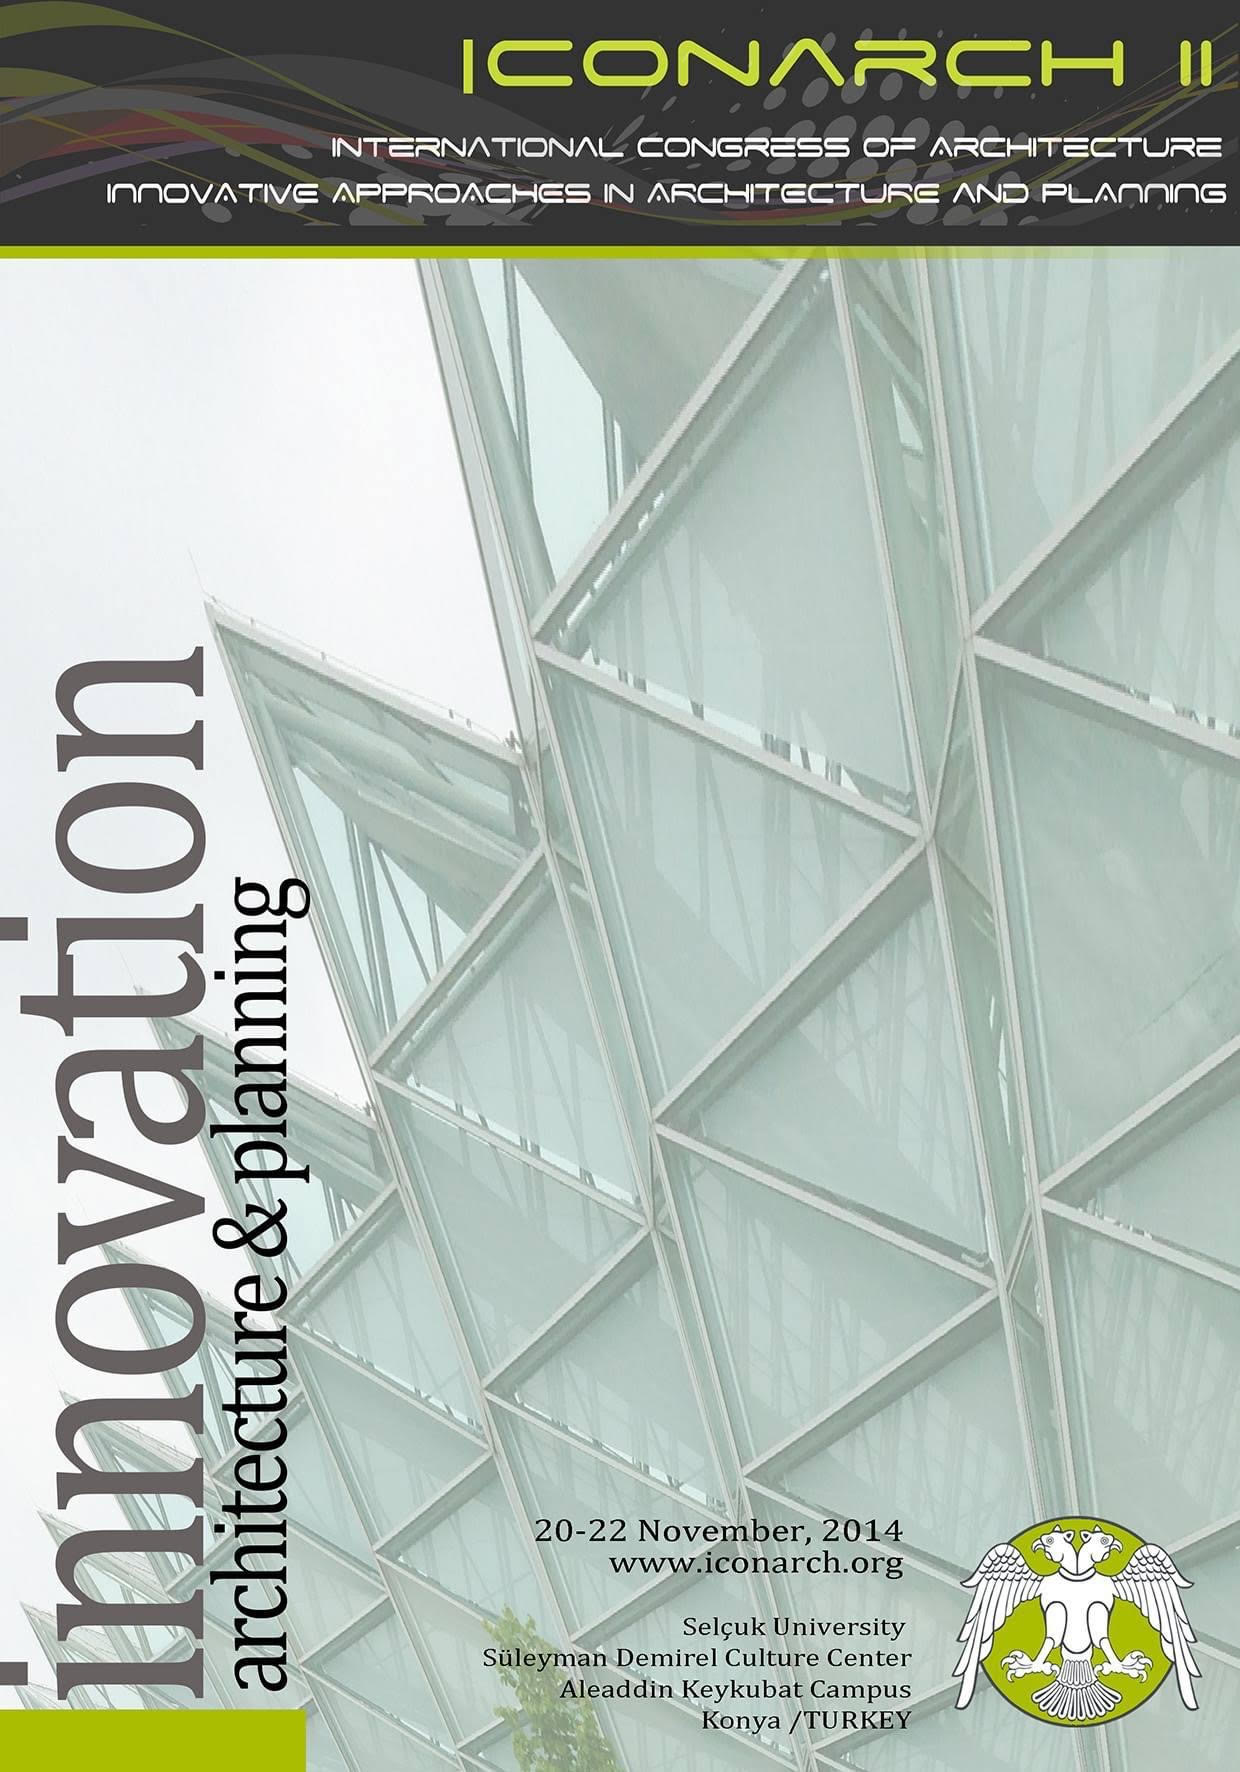 					View 2014: ICONARCH II - INNOVATIVE APPROACHES IN ARCHITECTURE AND PLANNING
				